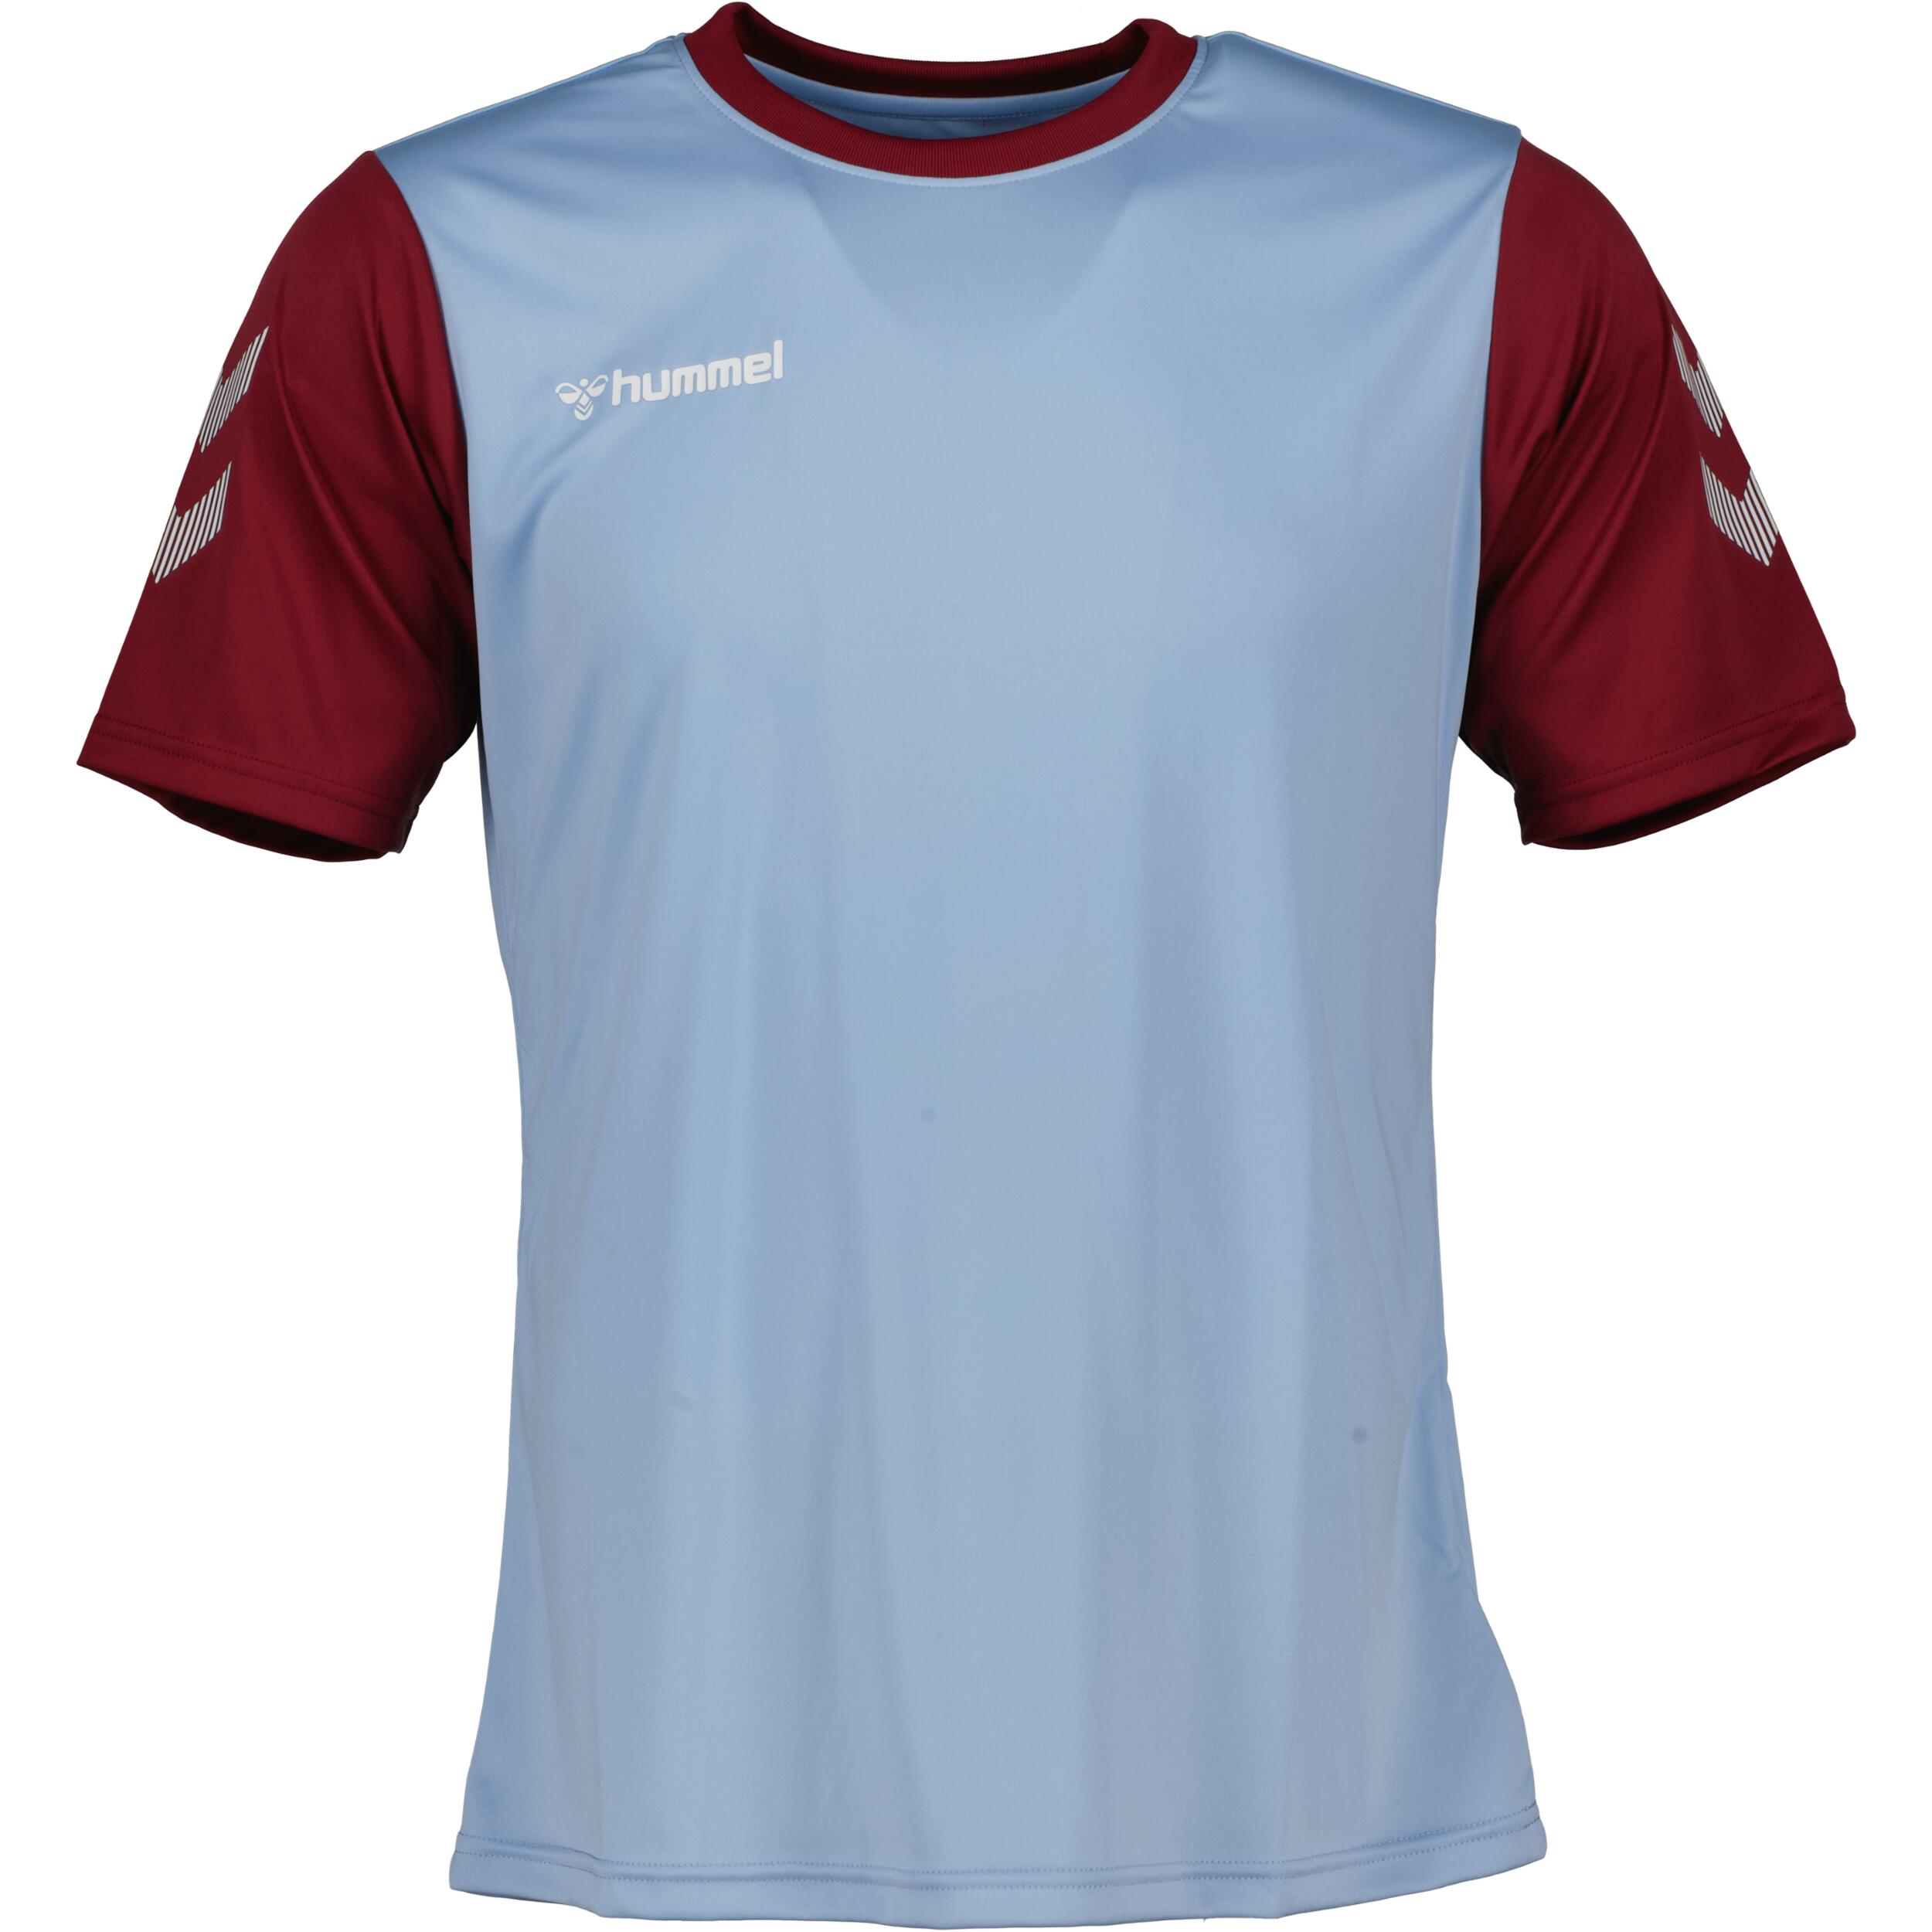 HUMMEL Match jersey for kids, great for football, in argentina blue/maroon